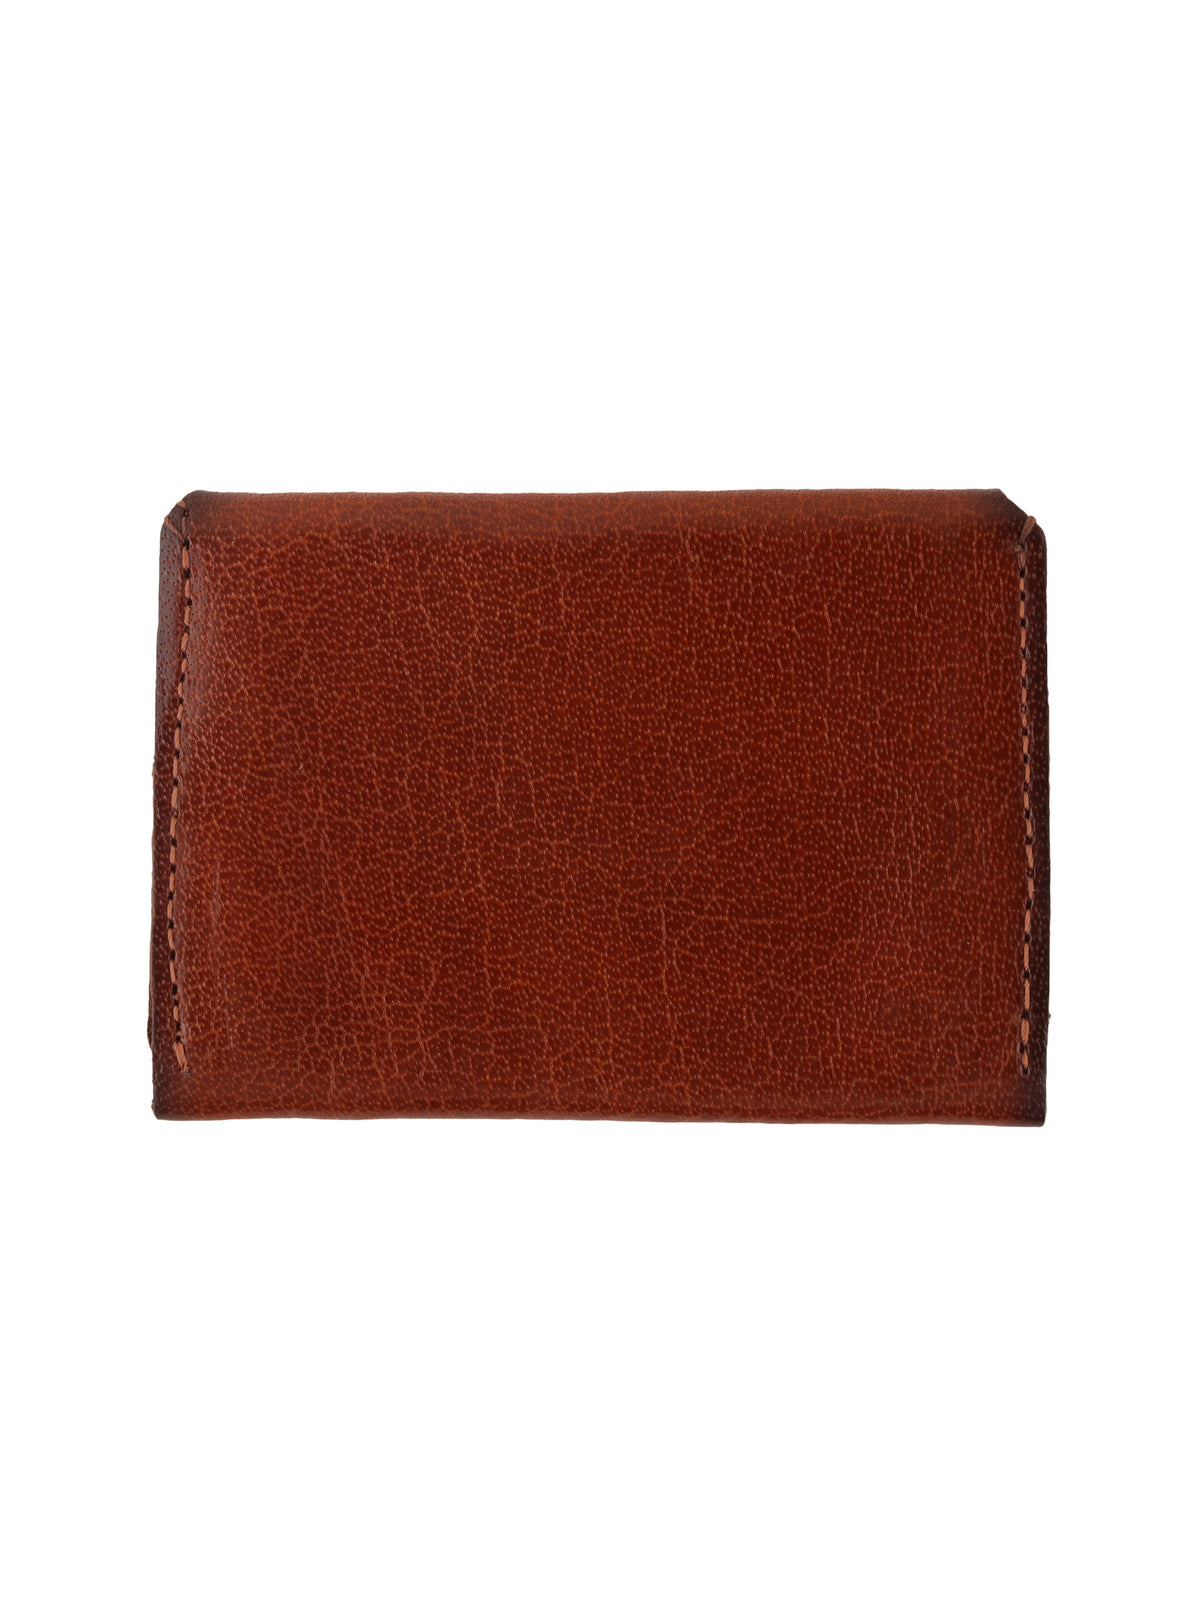 Two tone brown patina finish cardholder